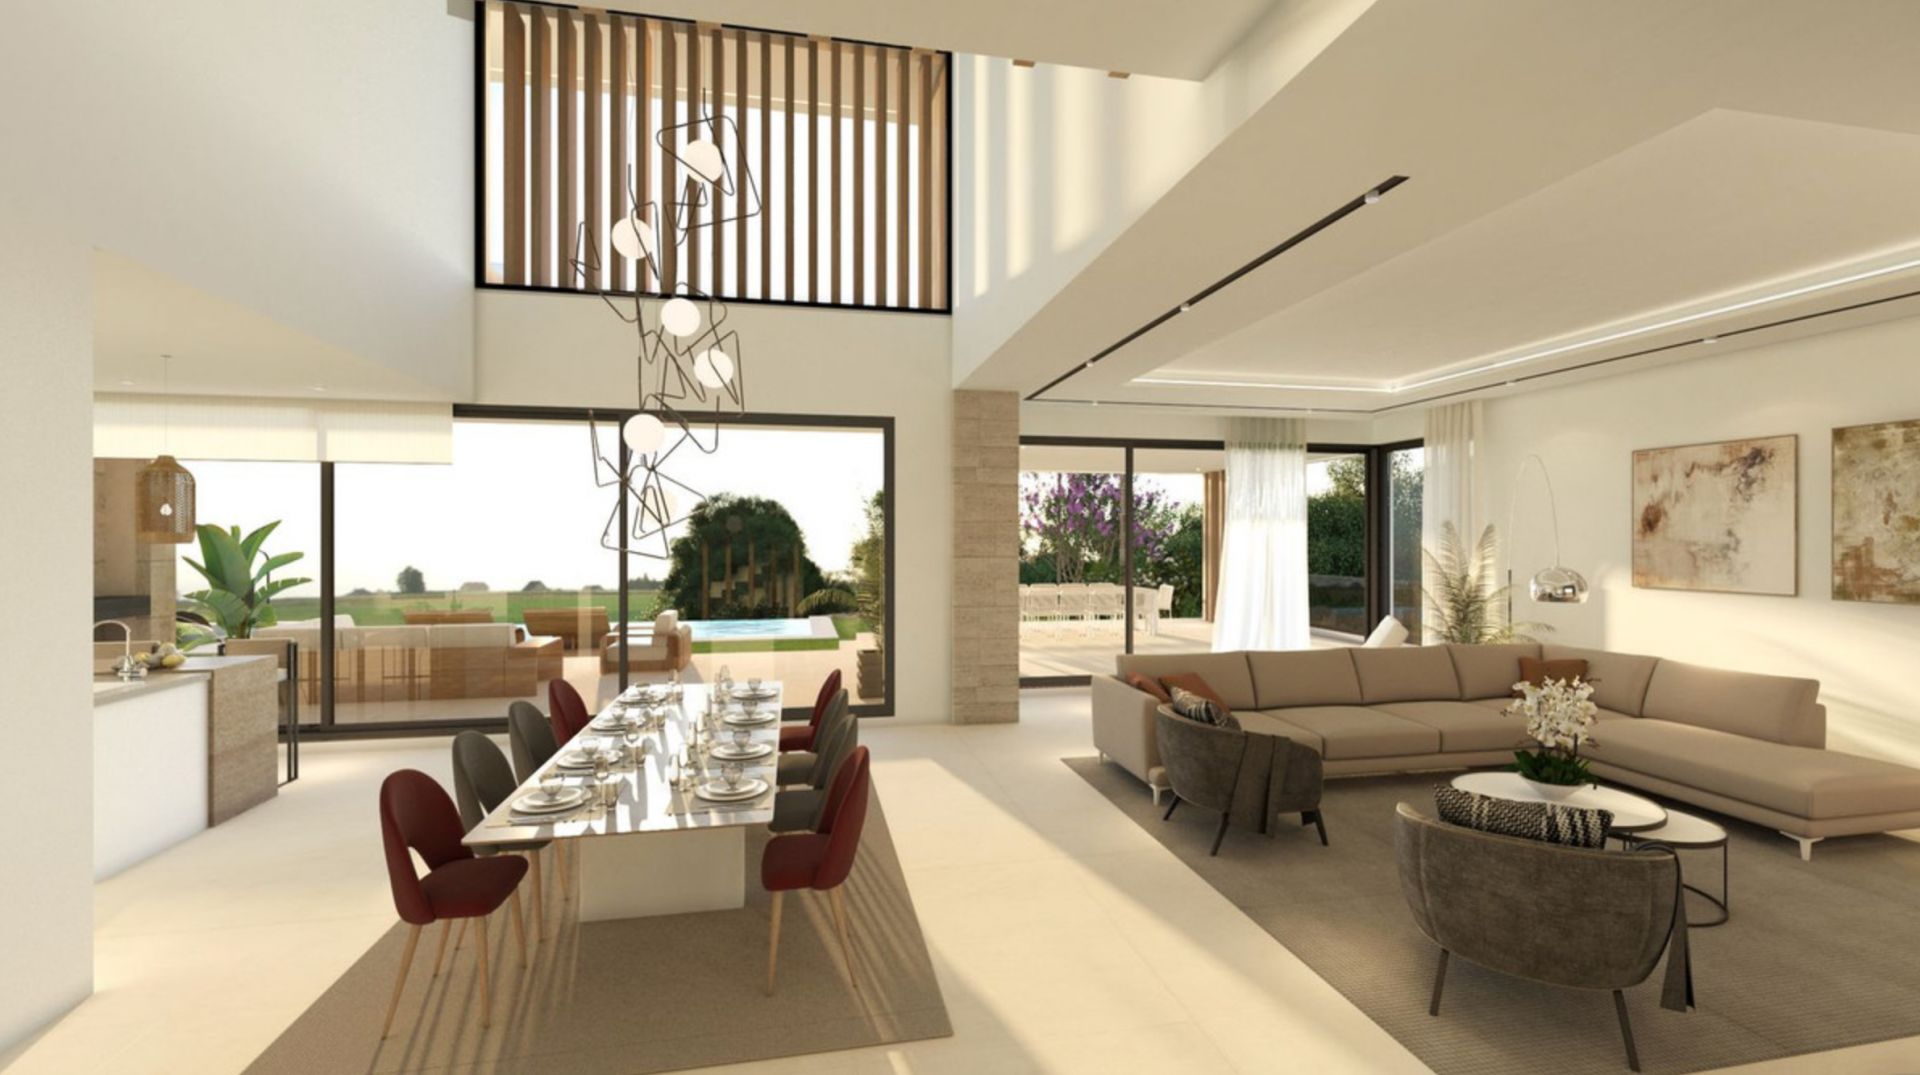 Brand new villa located in El Paraiso, one of the most exclusive residential areas in Costa del Sol